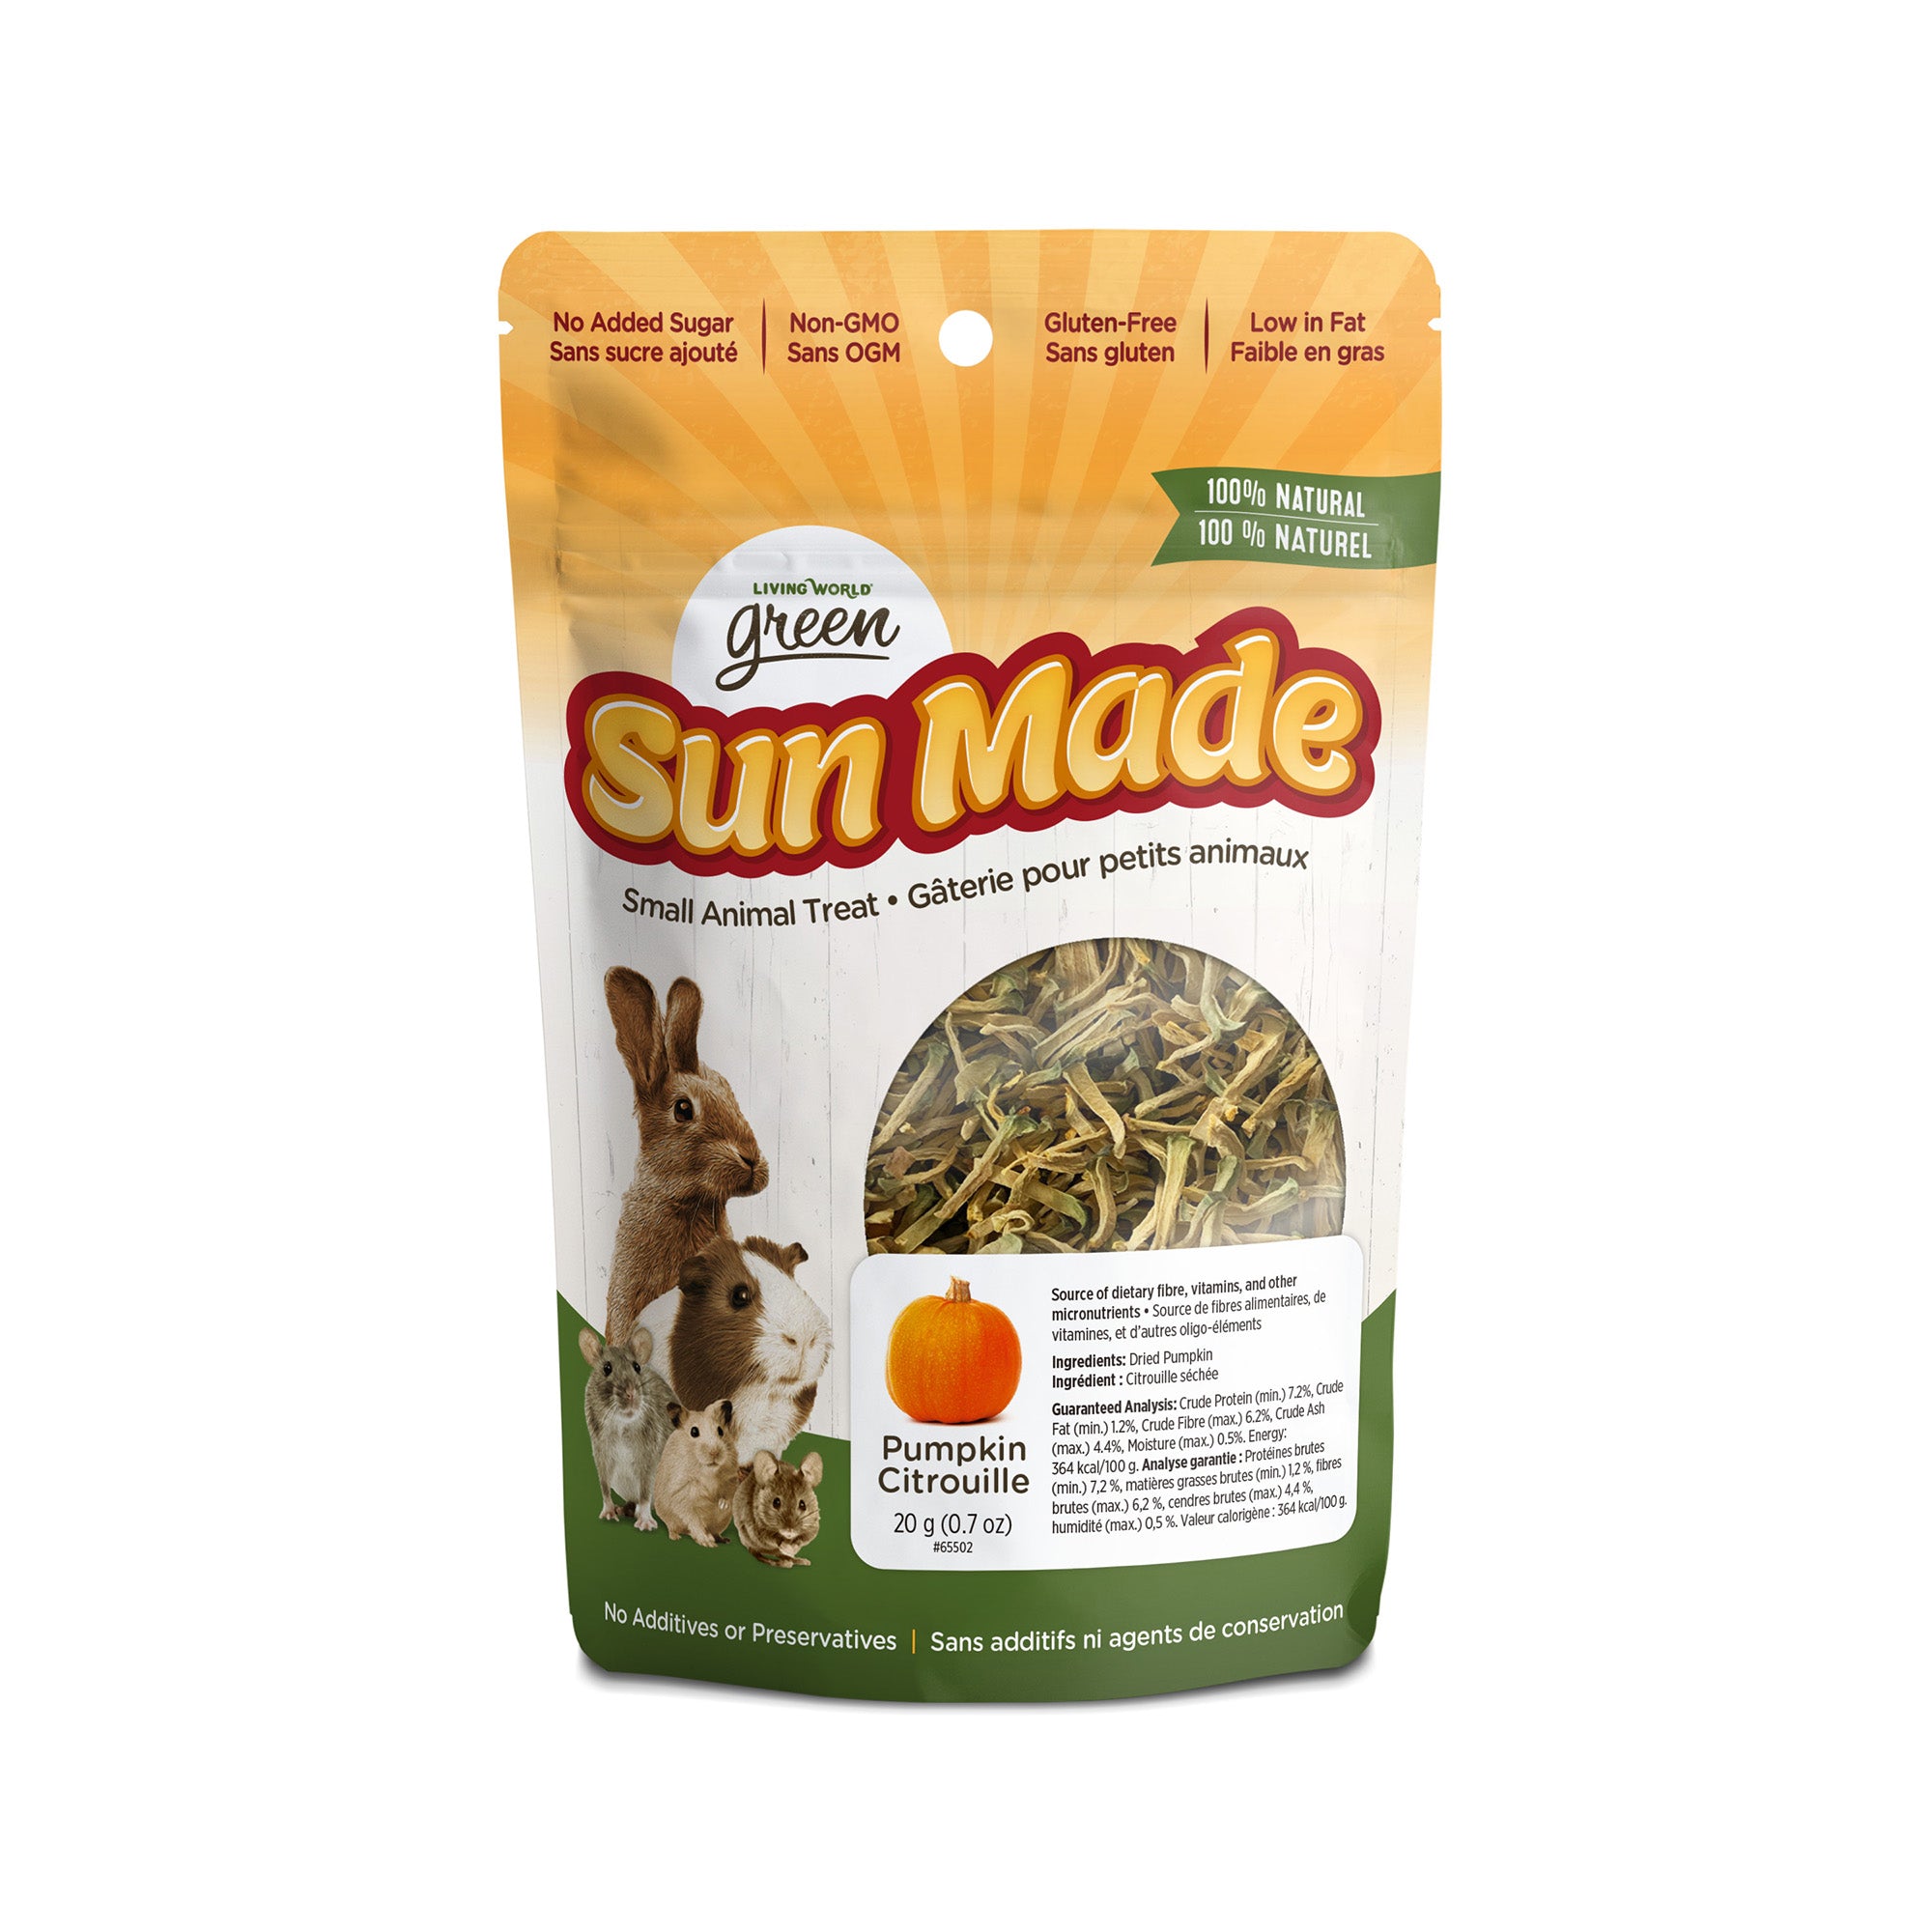 Gâteries Sun Made Living World Green pour petits animaux, citrouille, 20 g (0,7 oz)